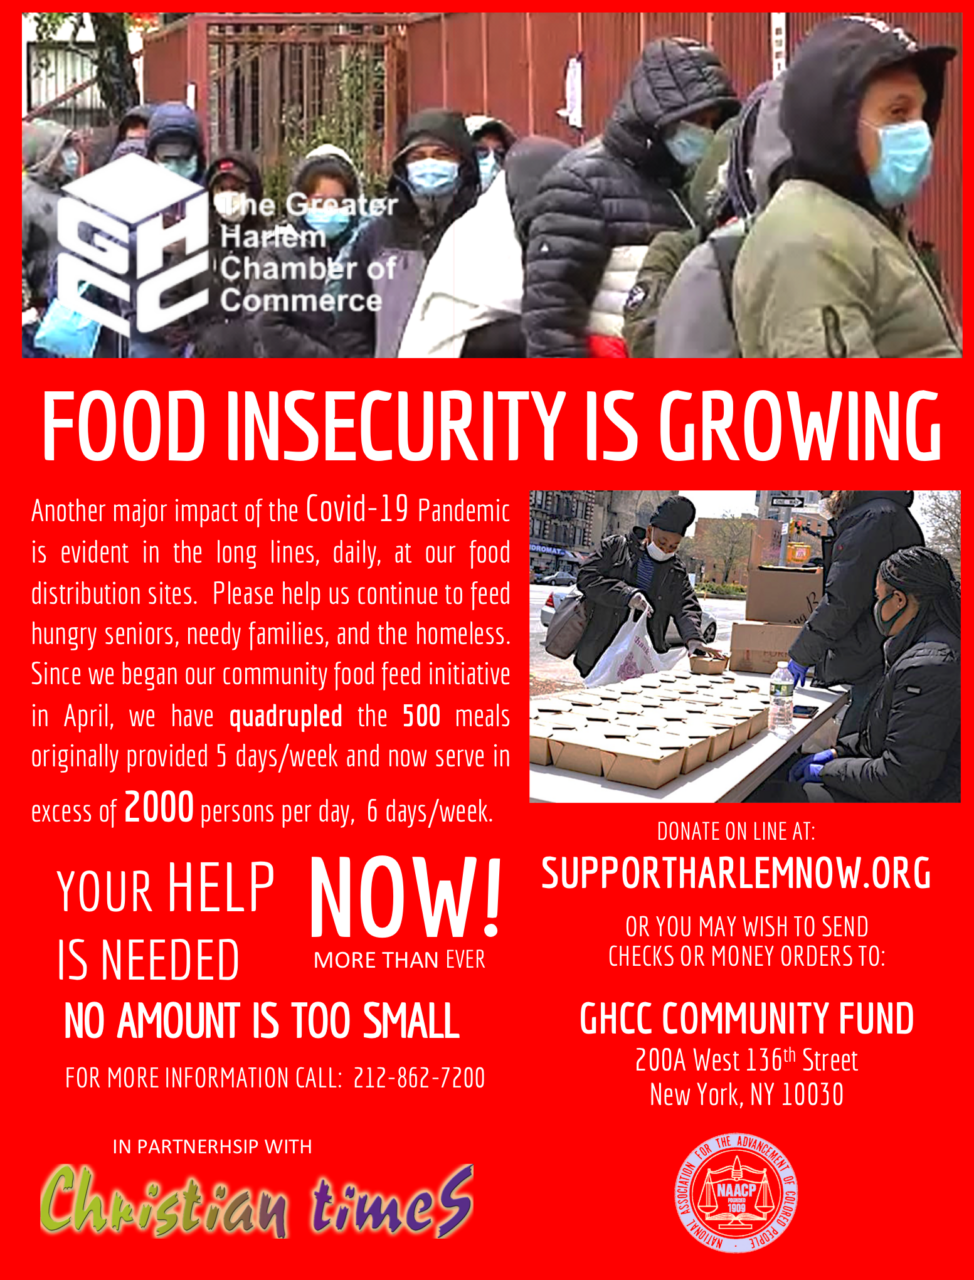 Food Insecurity is Growing - New York Christian Times